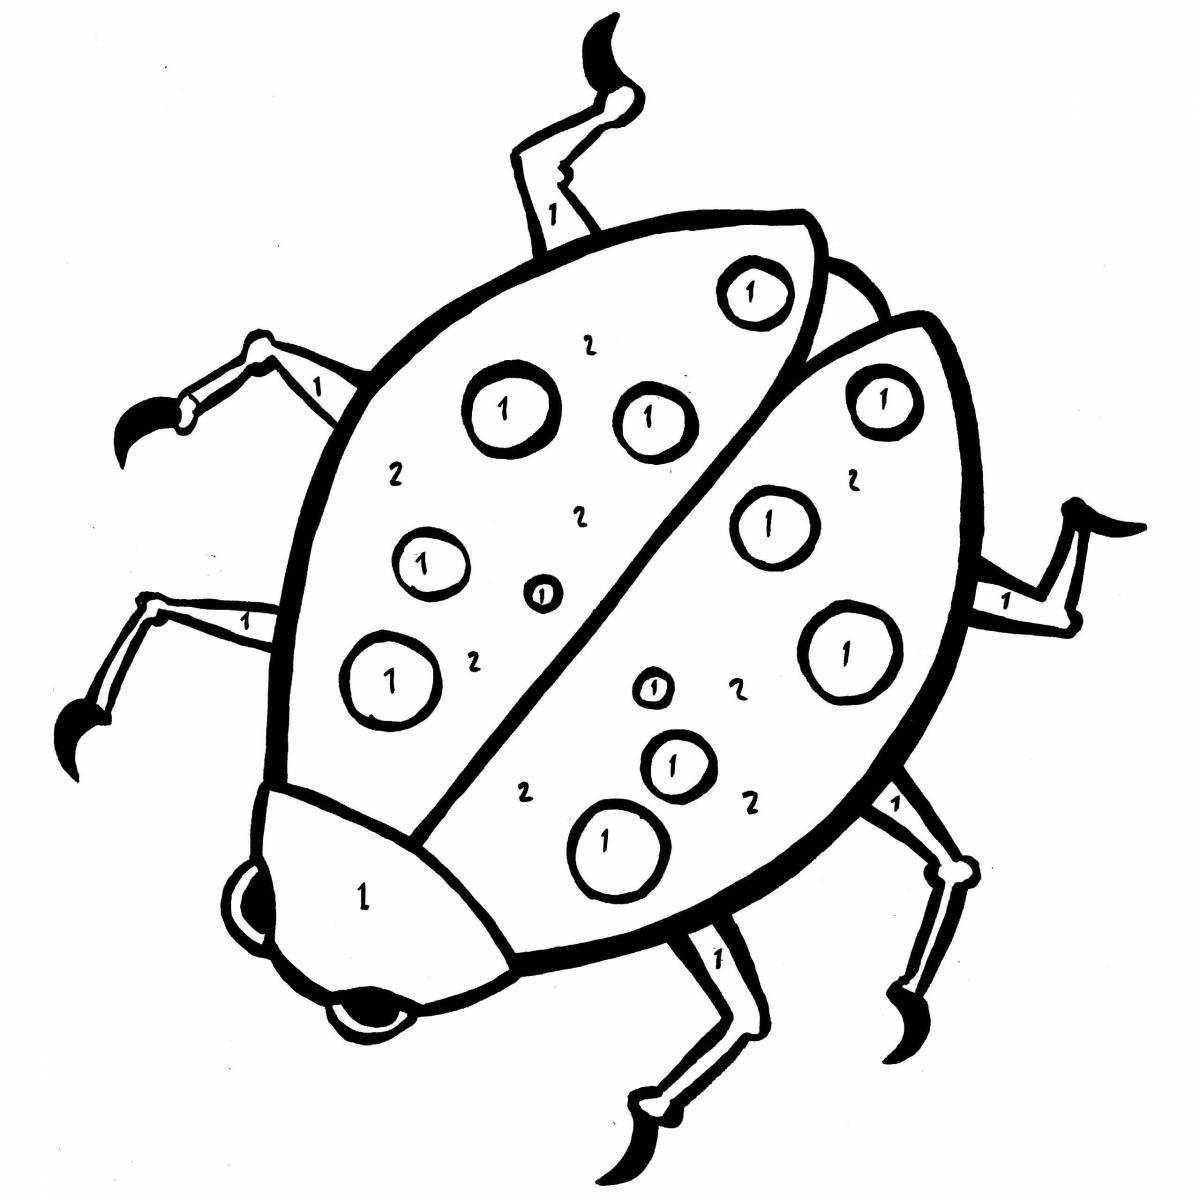 Coloring beetles for children 3-4 years old